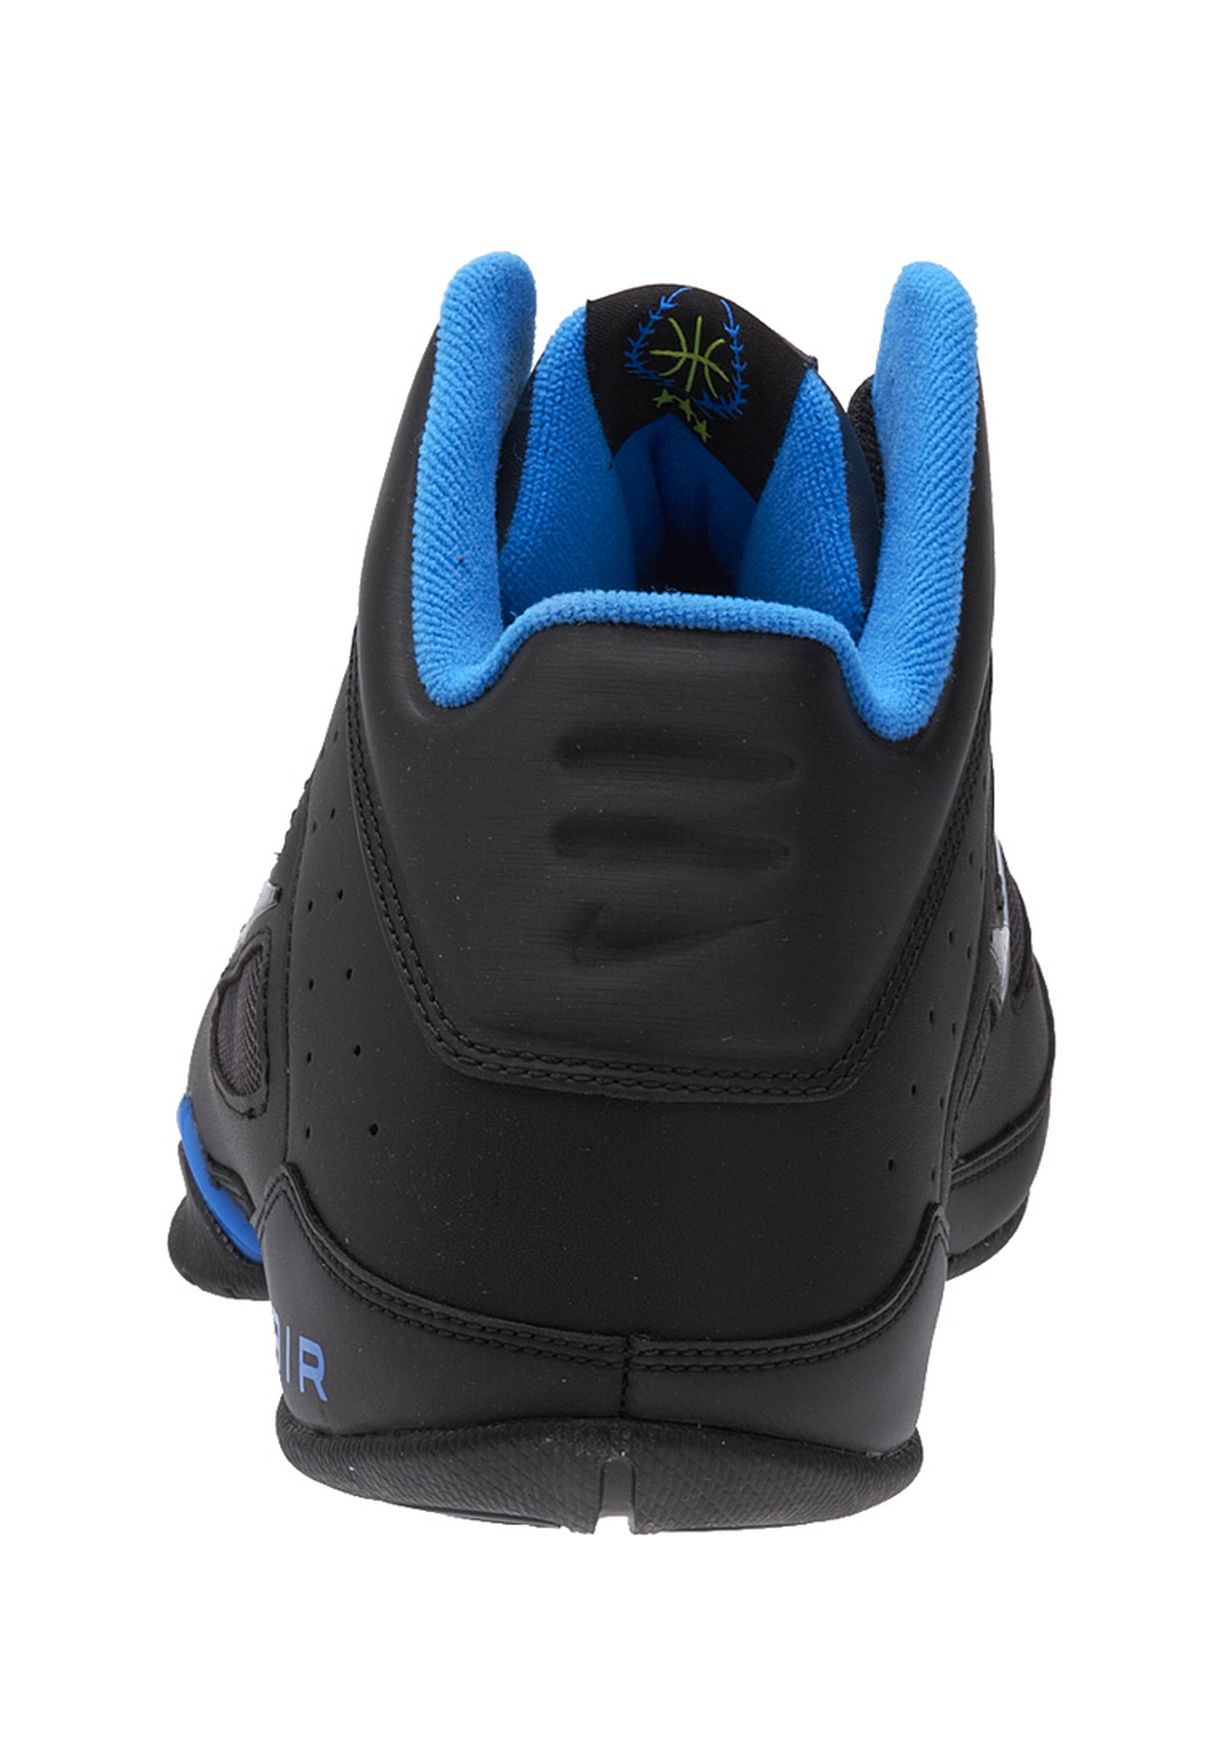 age Inquire sextant Buy Nike black Air Flight Showup 2 for Men in MENA, Worldwide